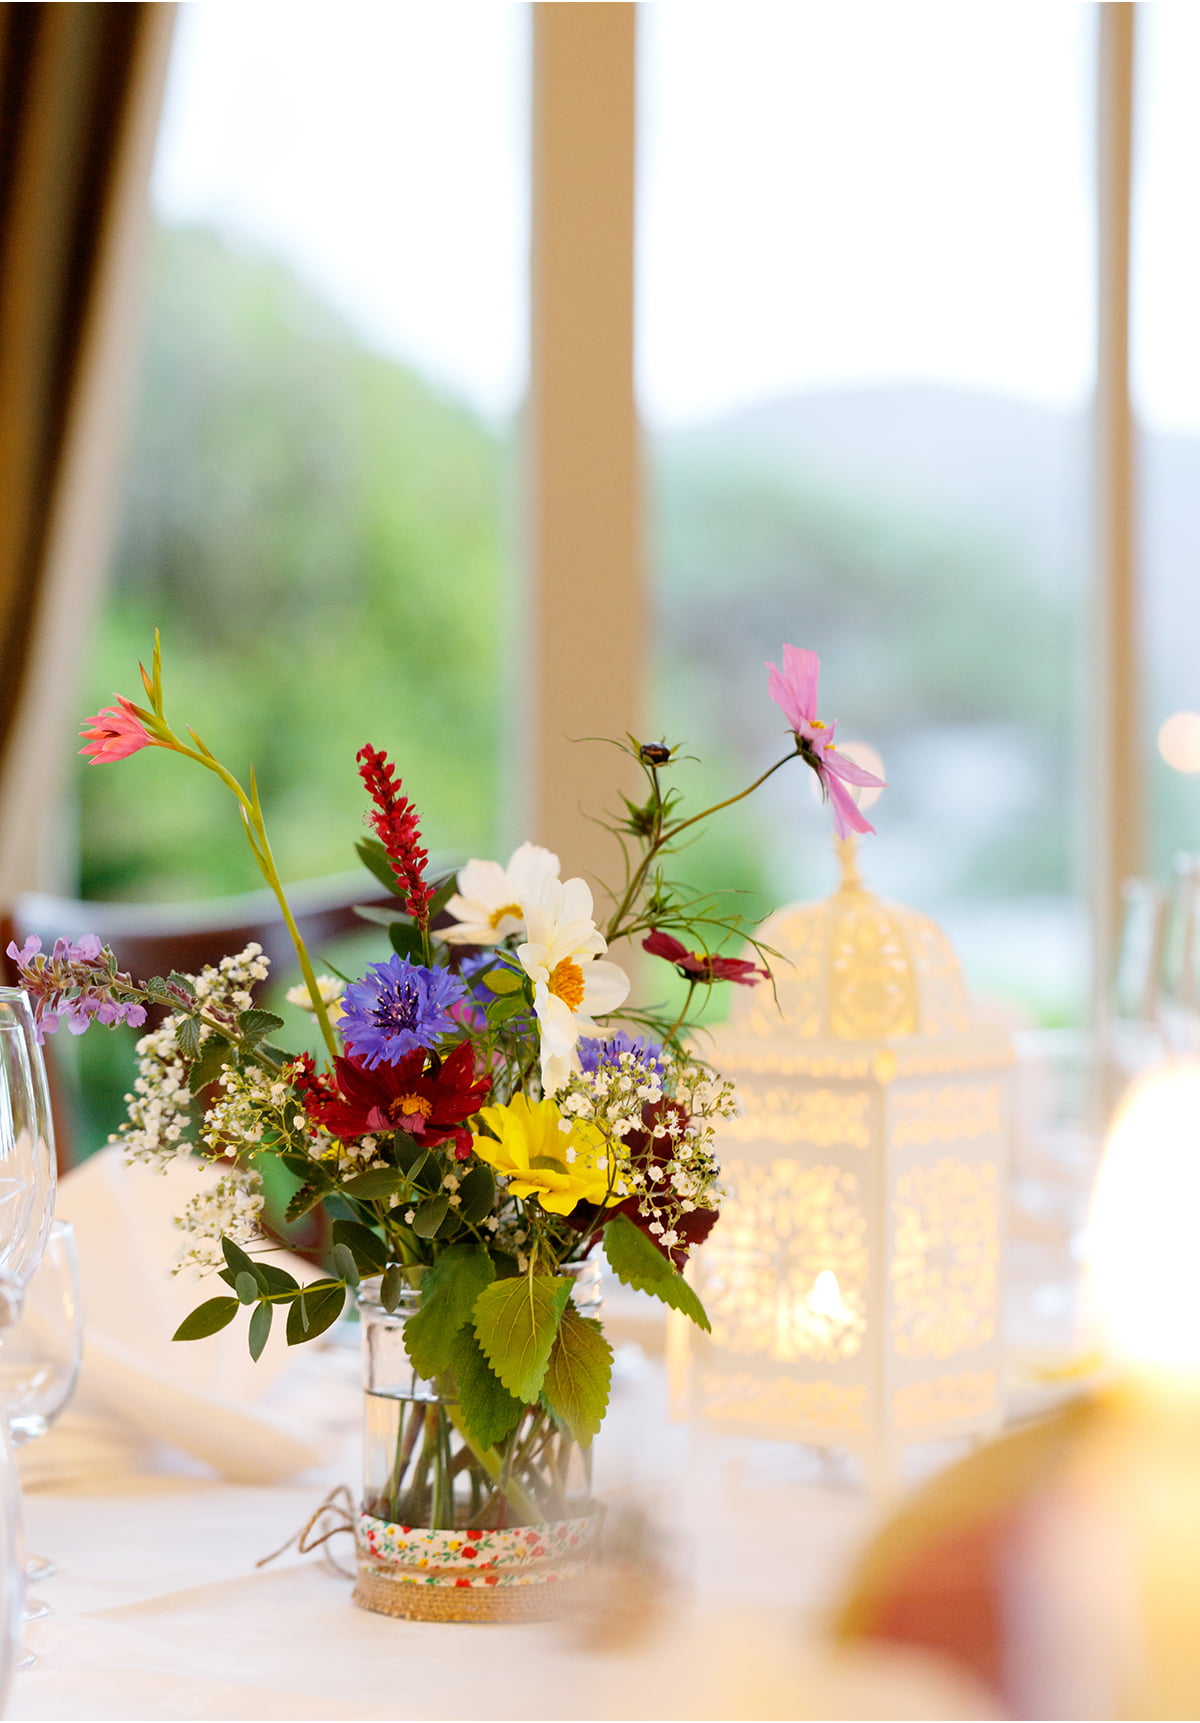 Carrig Country House wedding dining room